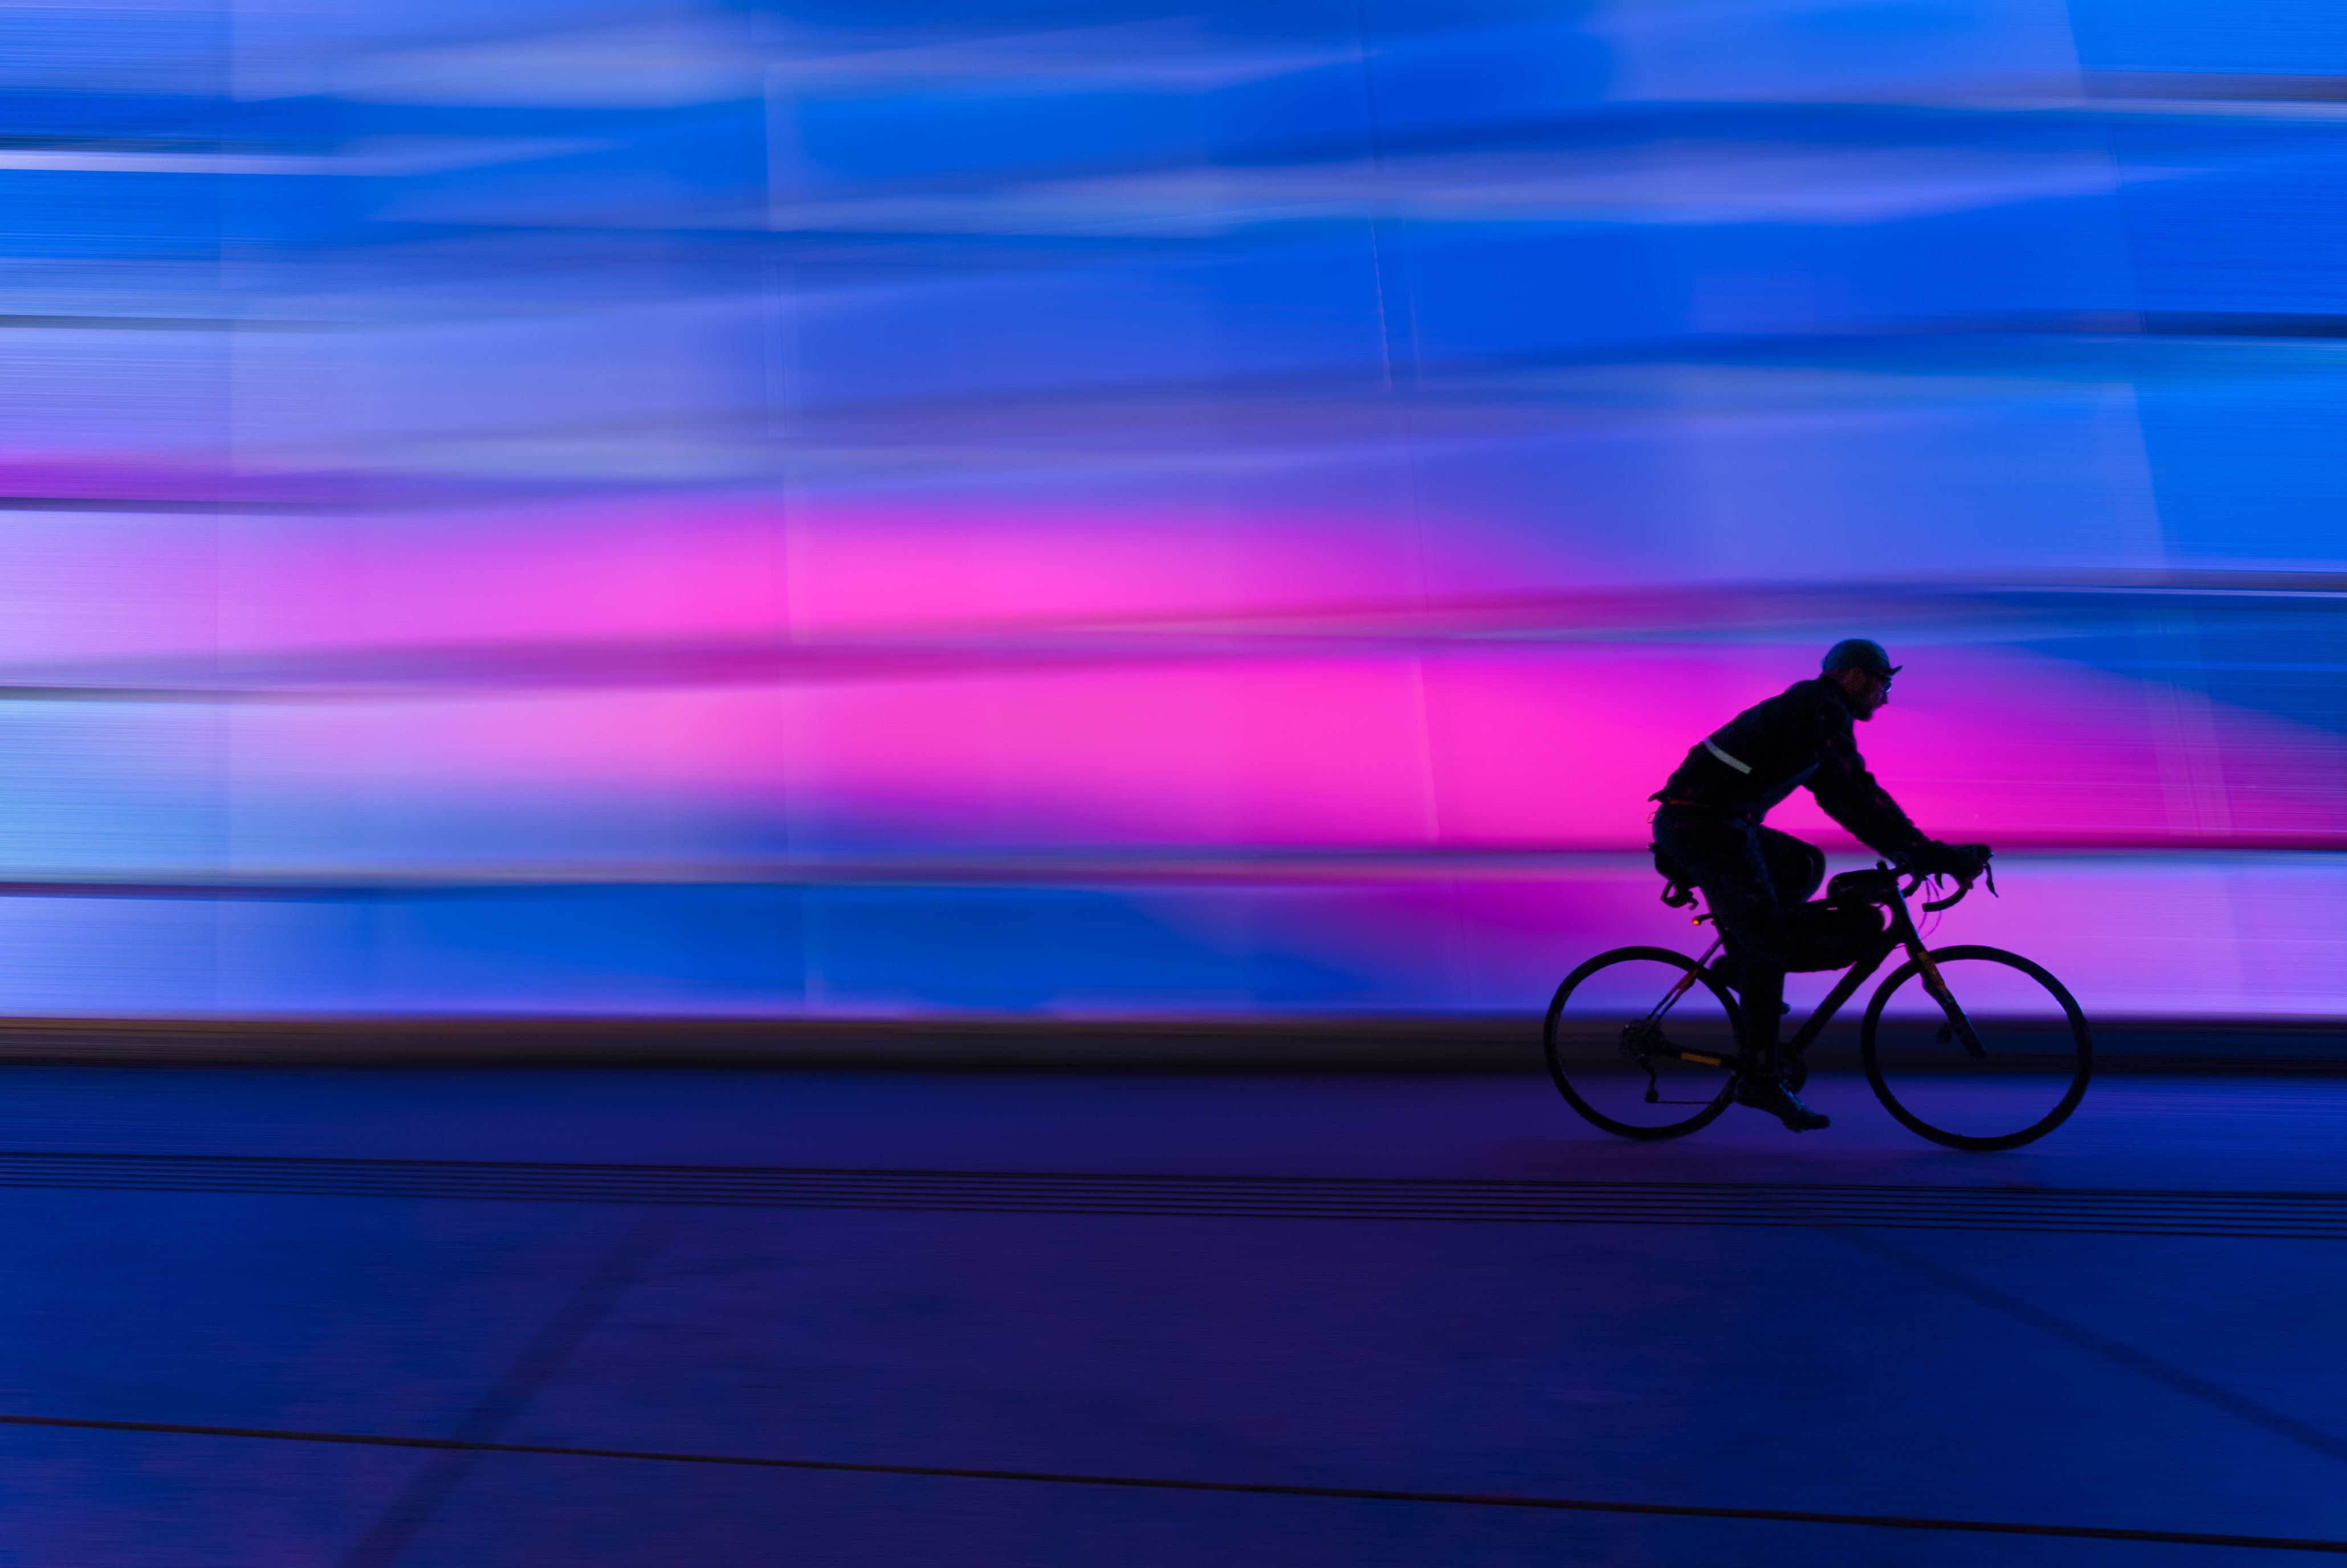 A cyclist riding in front of moody lighting